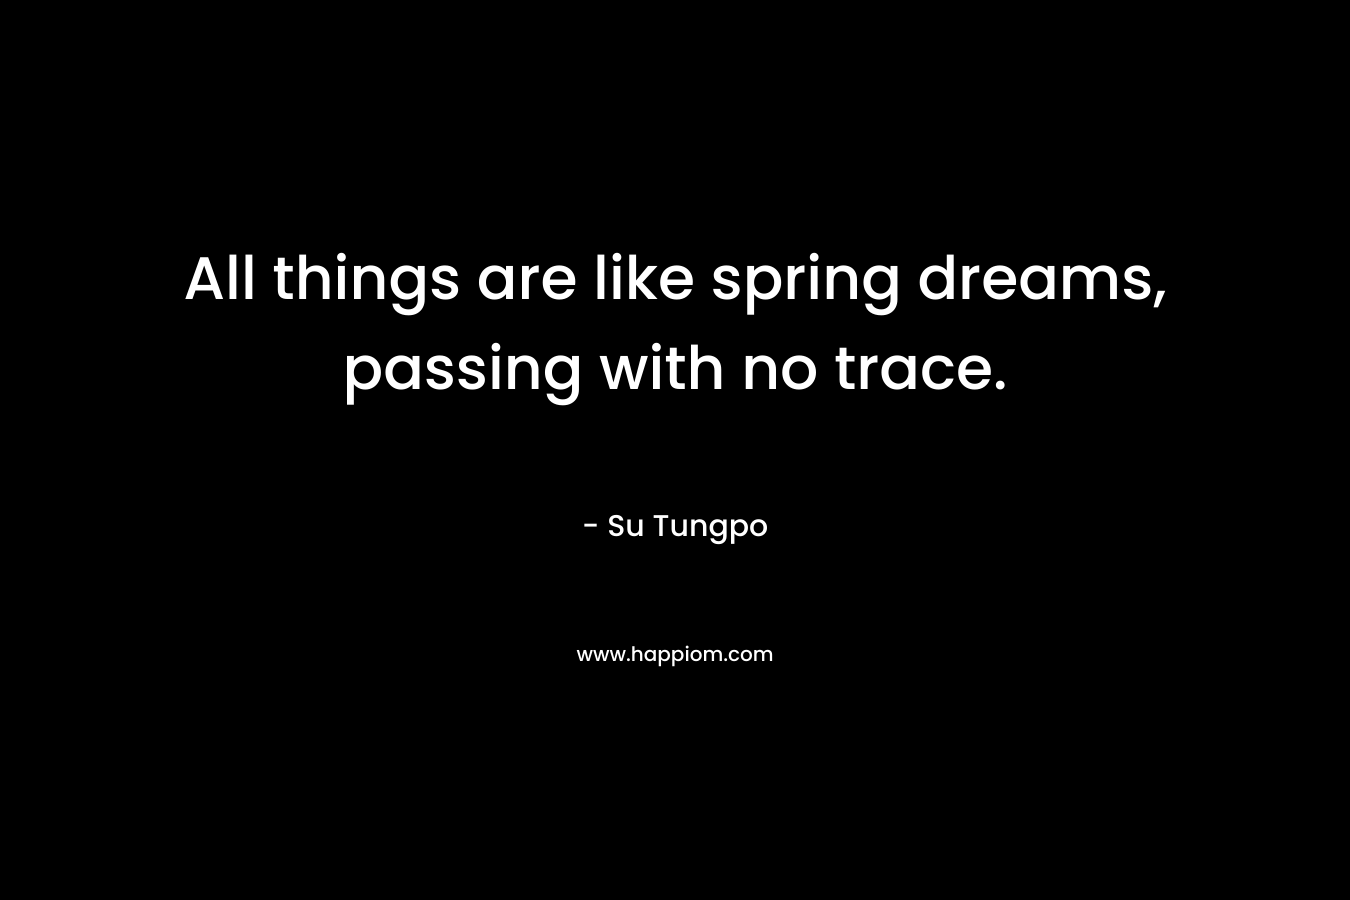 All things are like spring dreams, passing with no trace. – Su Tungpo